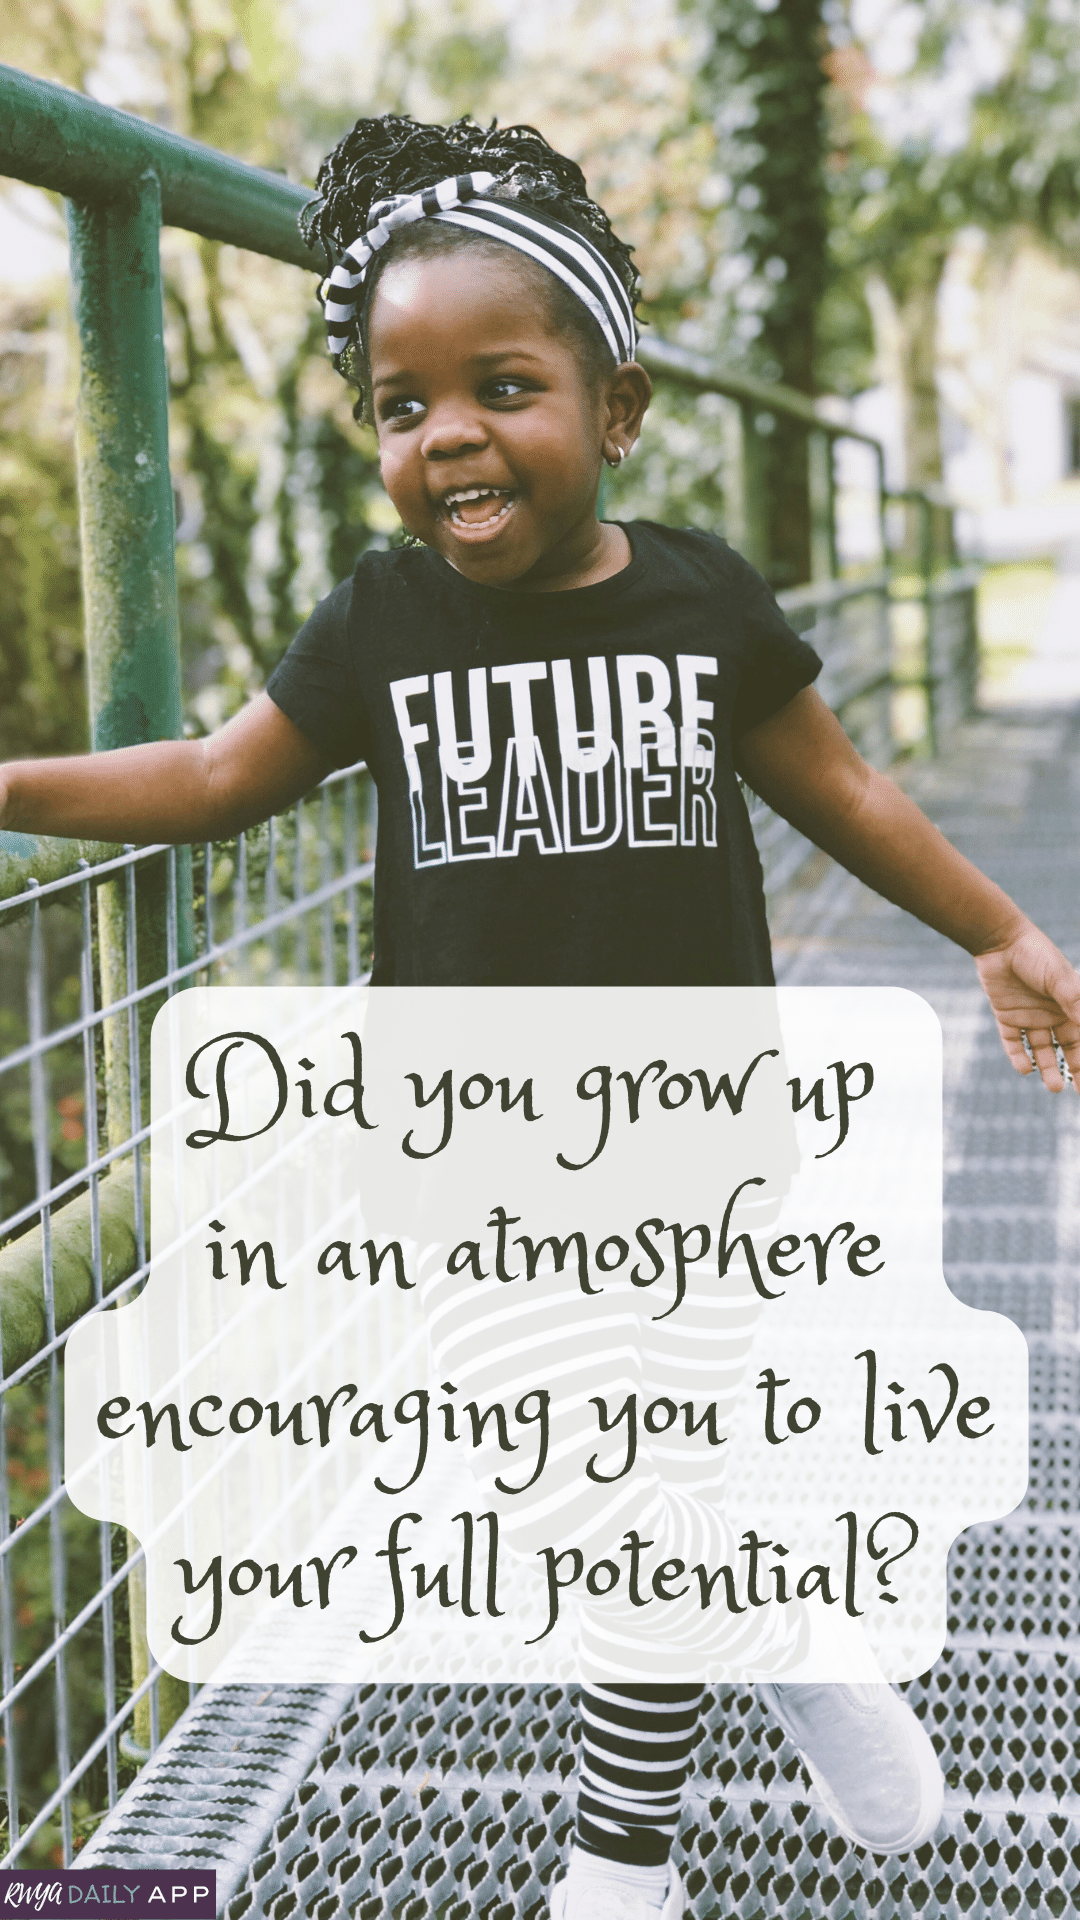 Did you grow up in an atmosphere encouraging you to live your full potential?